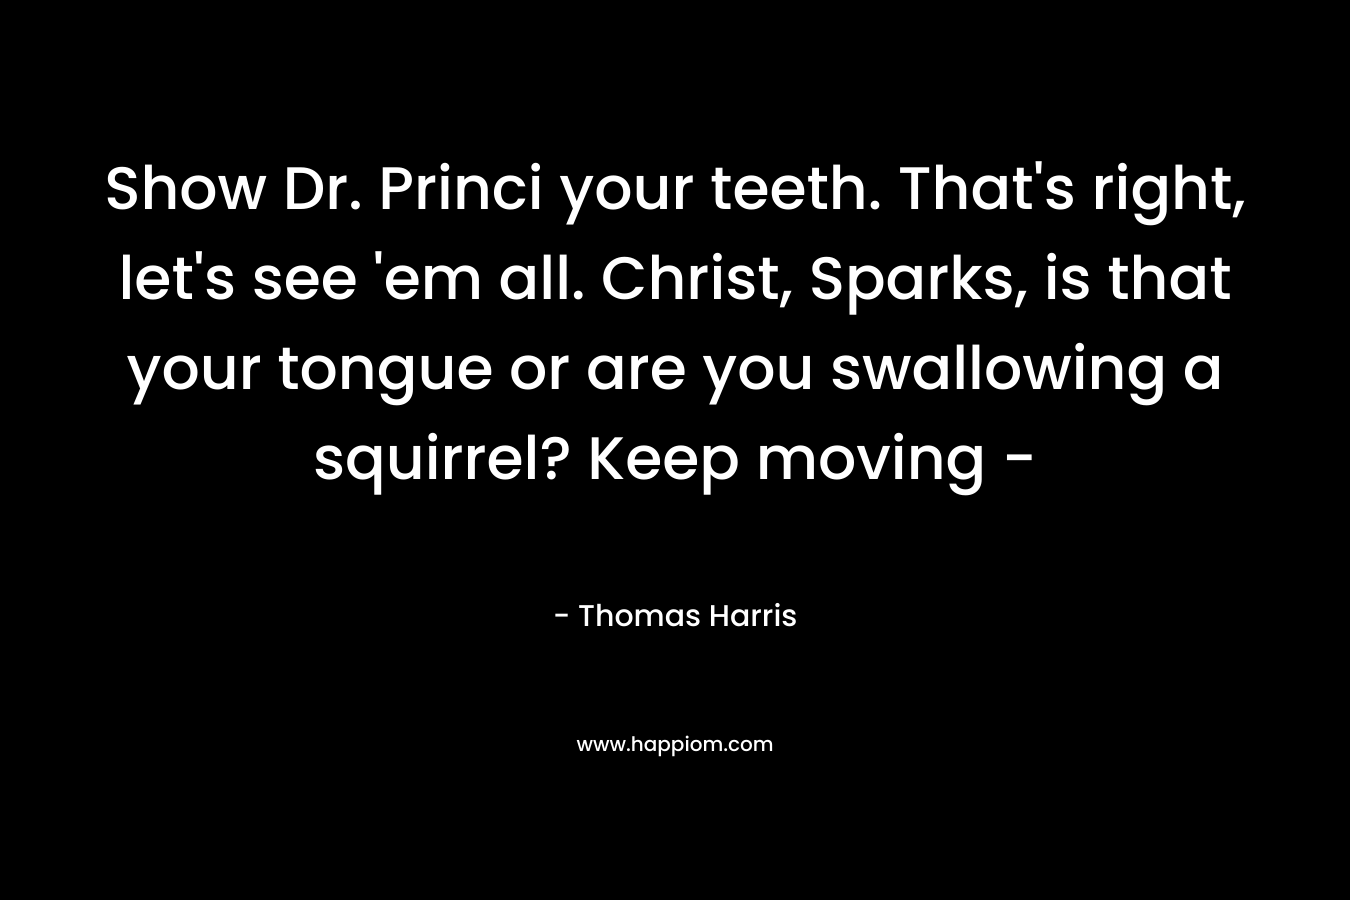 Show Dr. Princi your teeth. That’s right, let’s see ’em all. Christ, Sparks, is that your tongue or are you swallowing a squirrel? Keep moving – – Thomas Harris